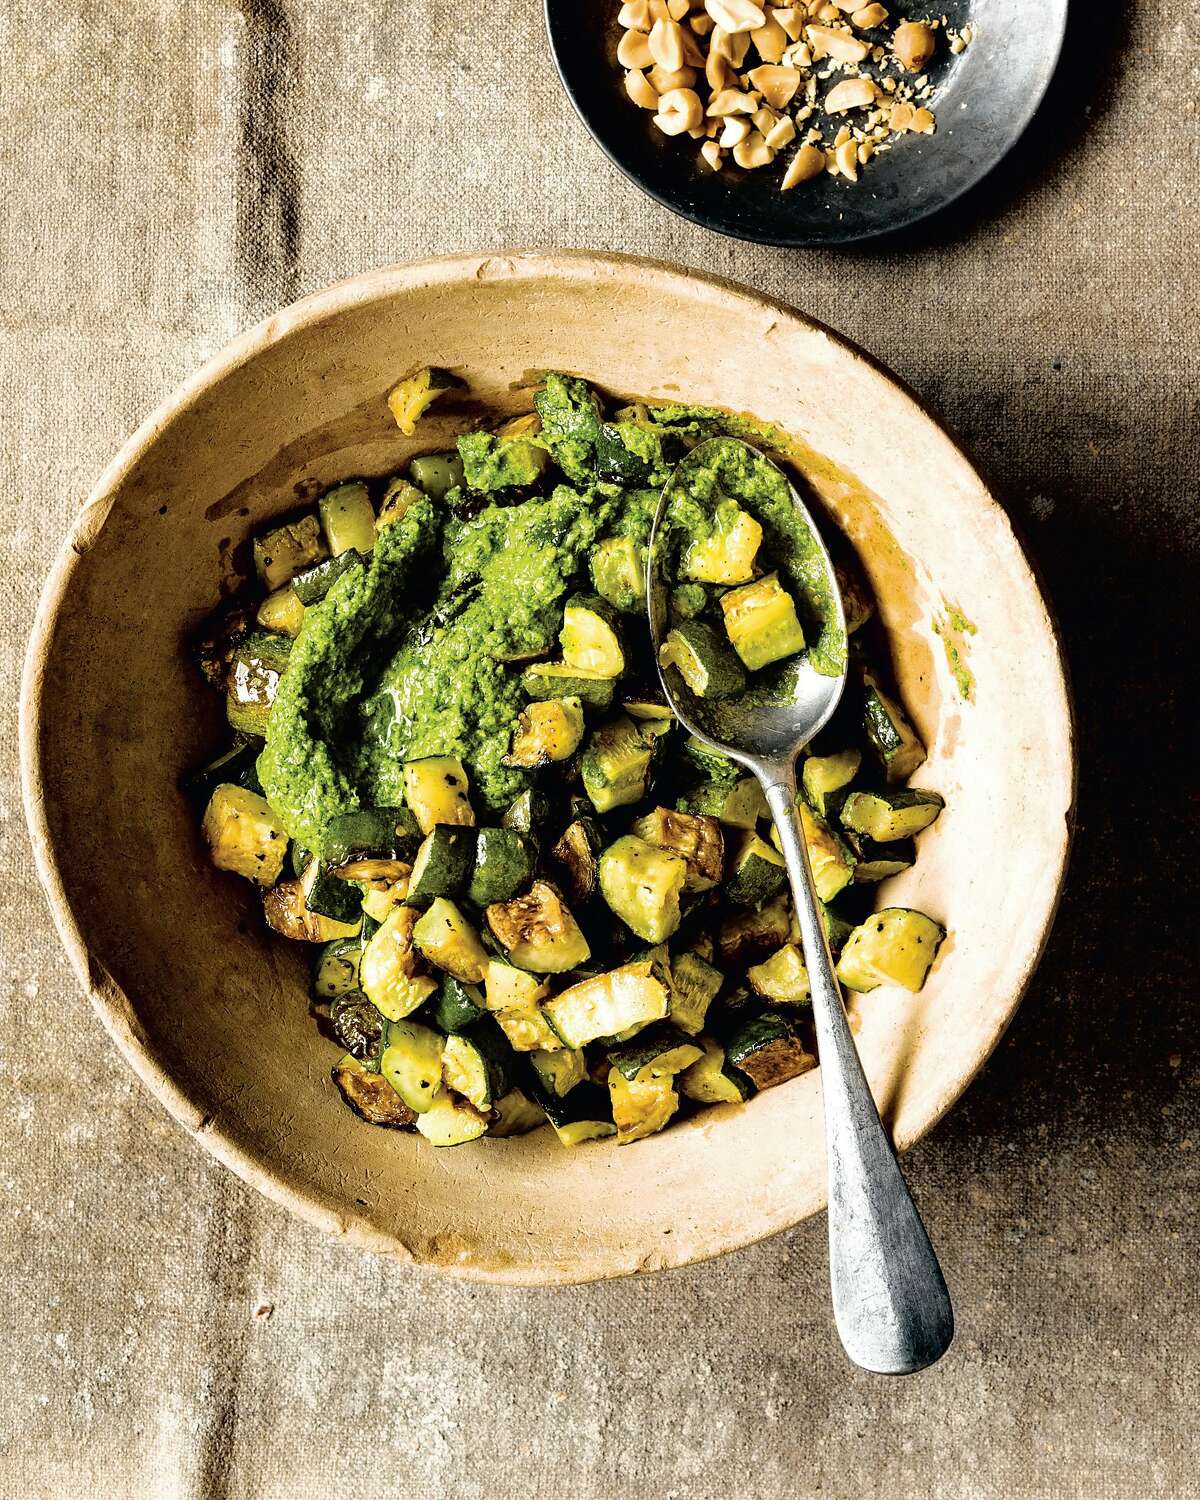 Oven-roasted Zucchini With Collard-Peanut Pesto from "Vegetable Kingdom," the new cookbook from Oakland chef Bryant Terry.